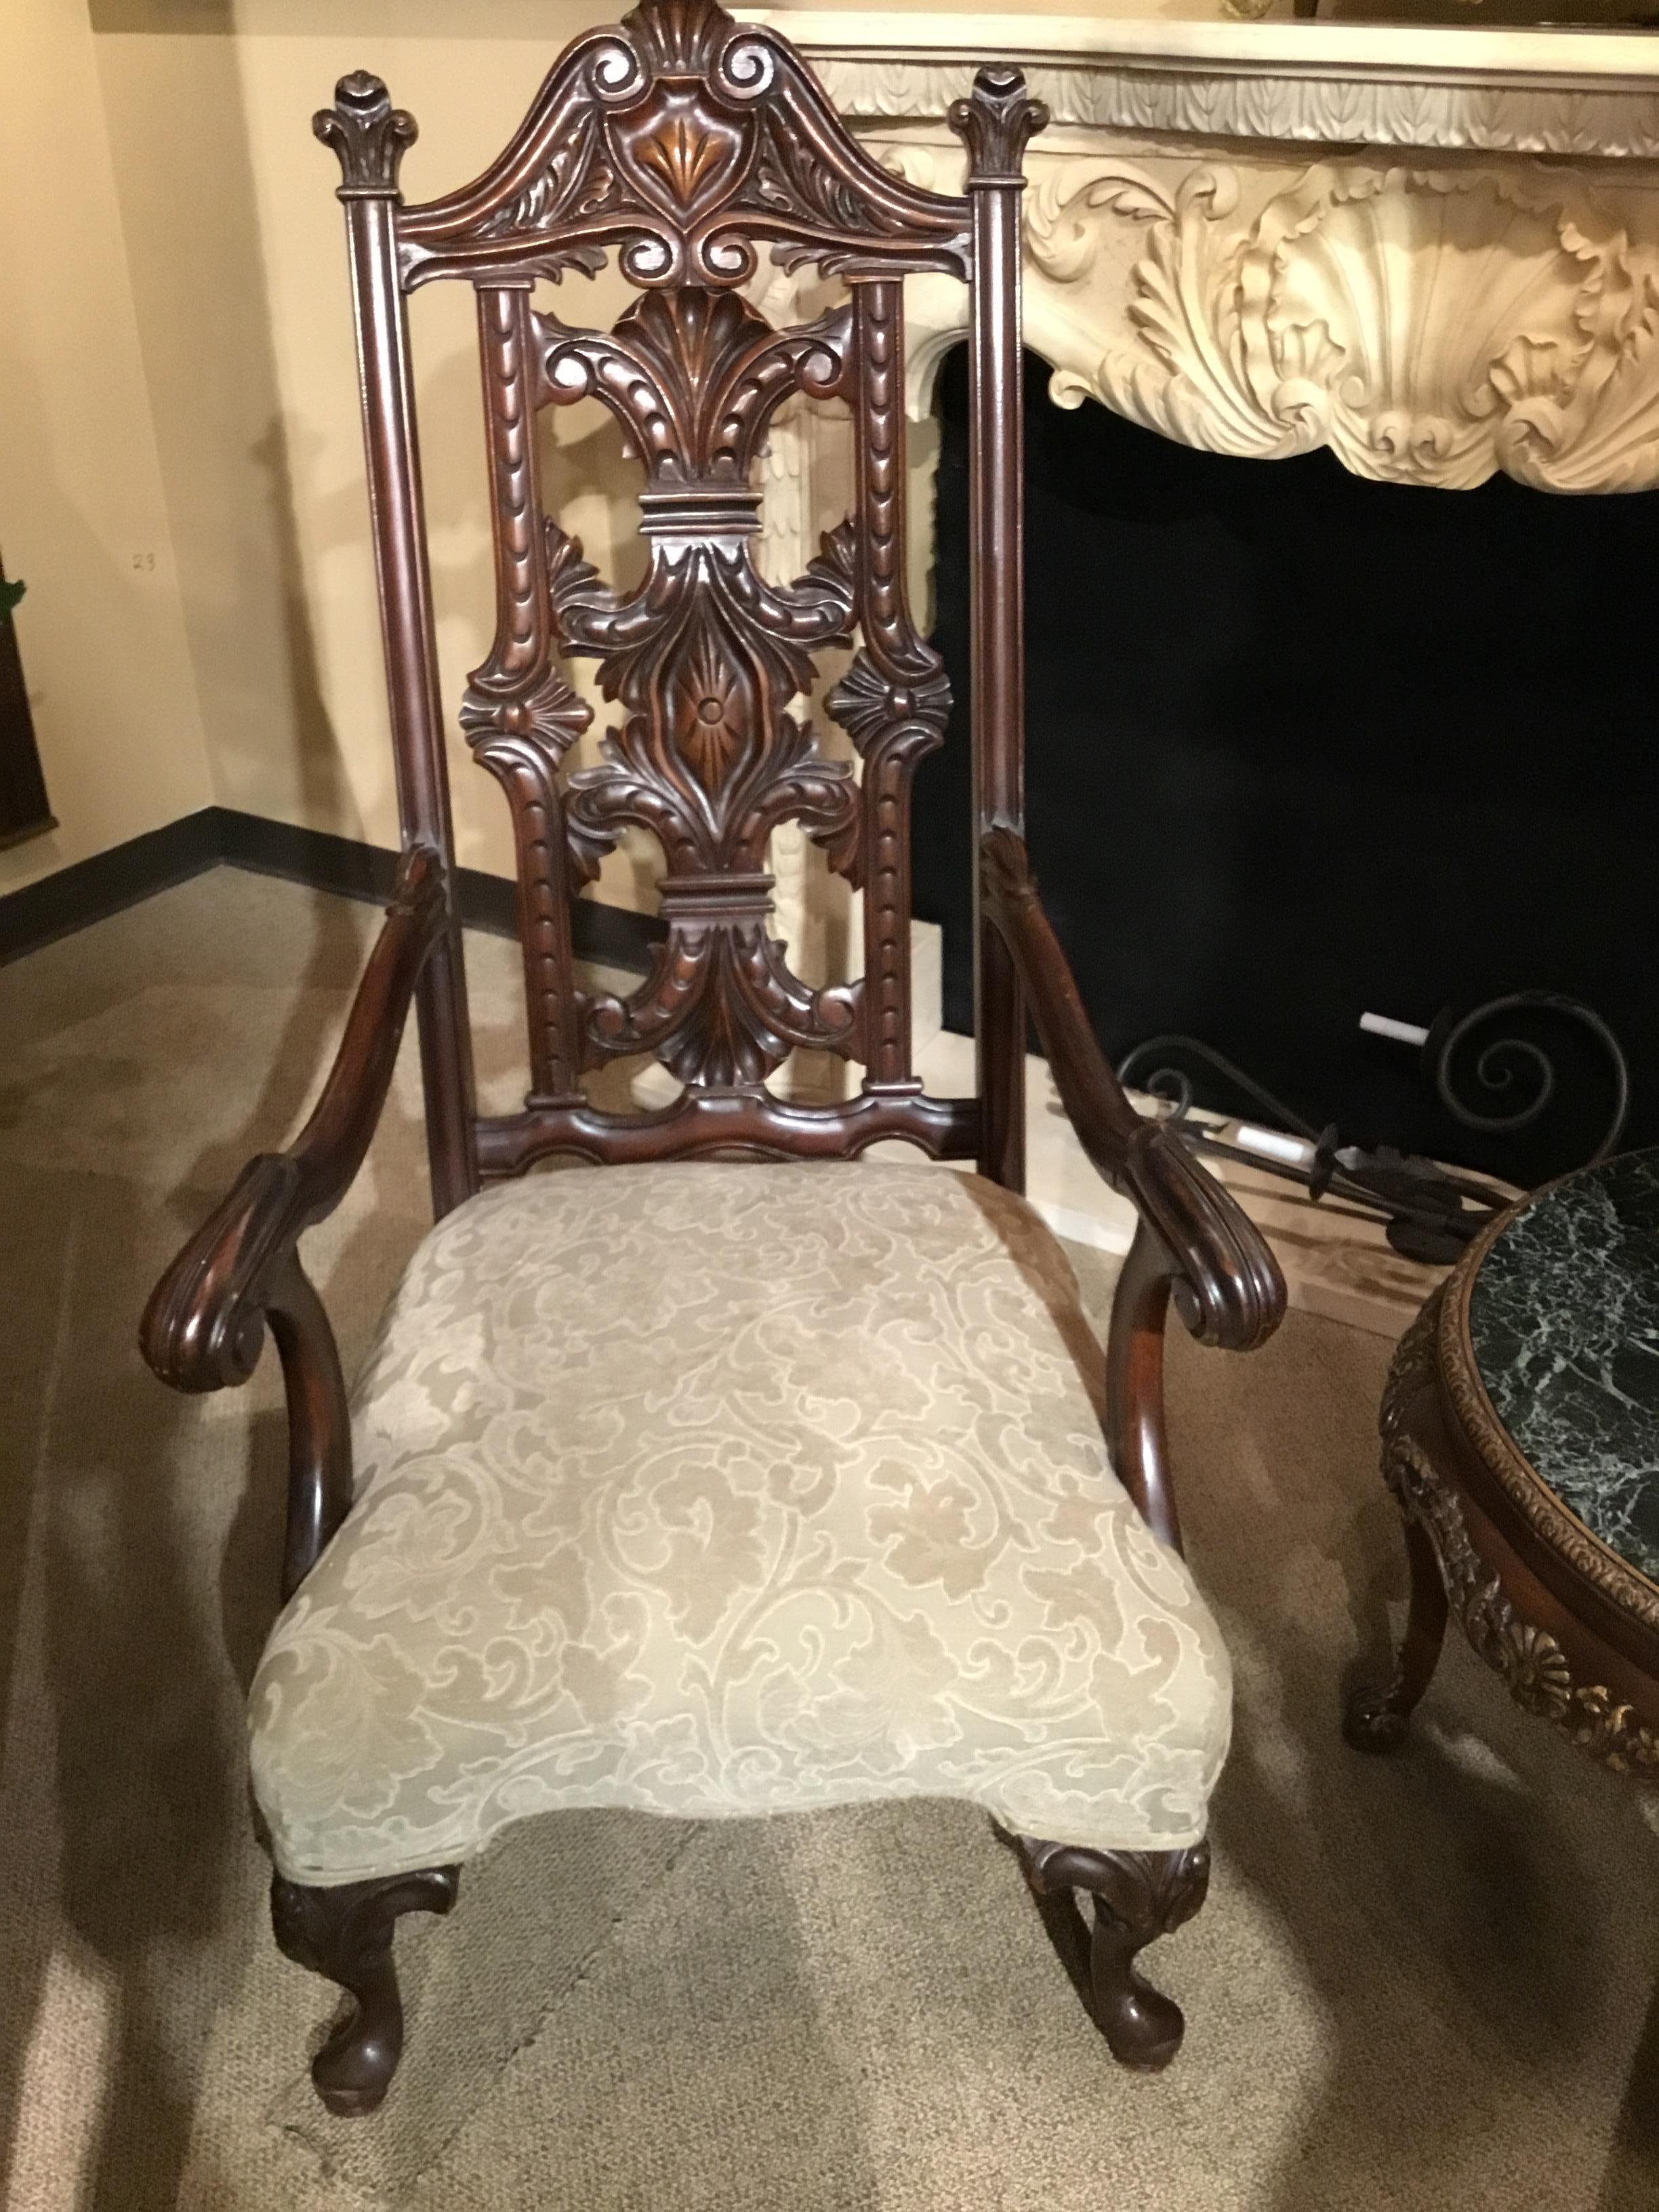 Exceptional carving with intricate open pierced carving on the back of
This chair. Gracefull curved arms that curl at the ends.
New cream upholstery make this Piece especially desirable.
The legs are in the Queen Anne style.